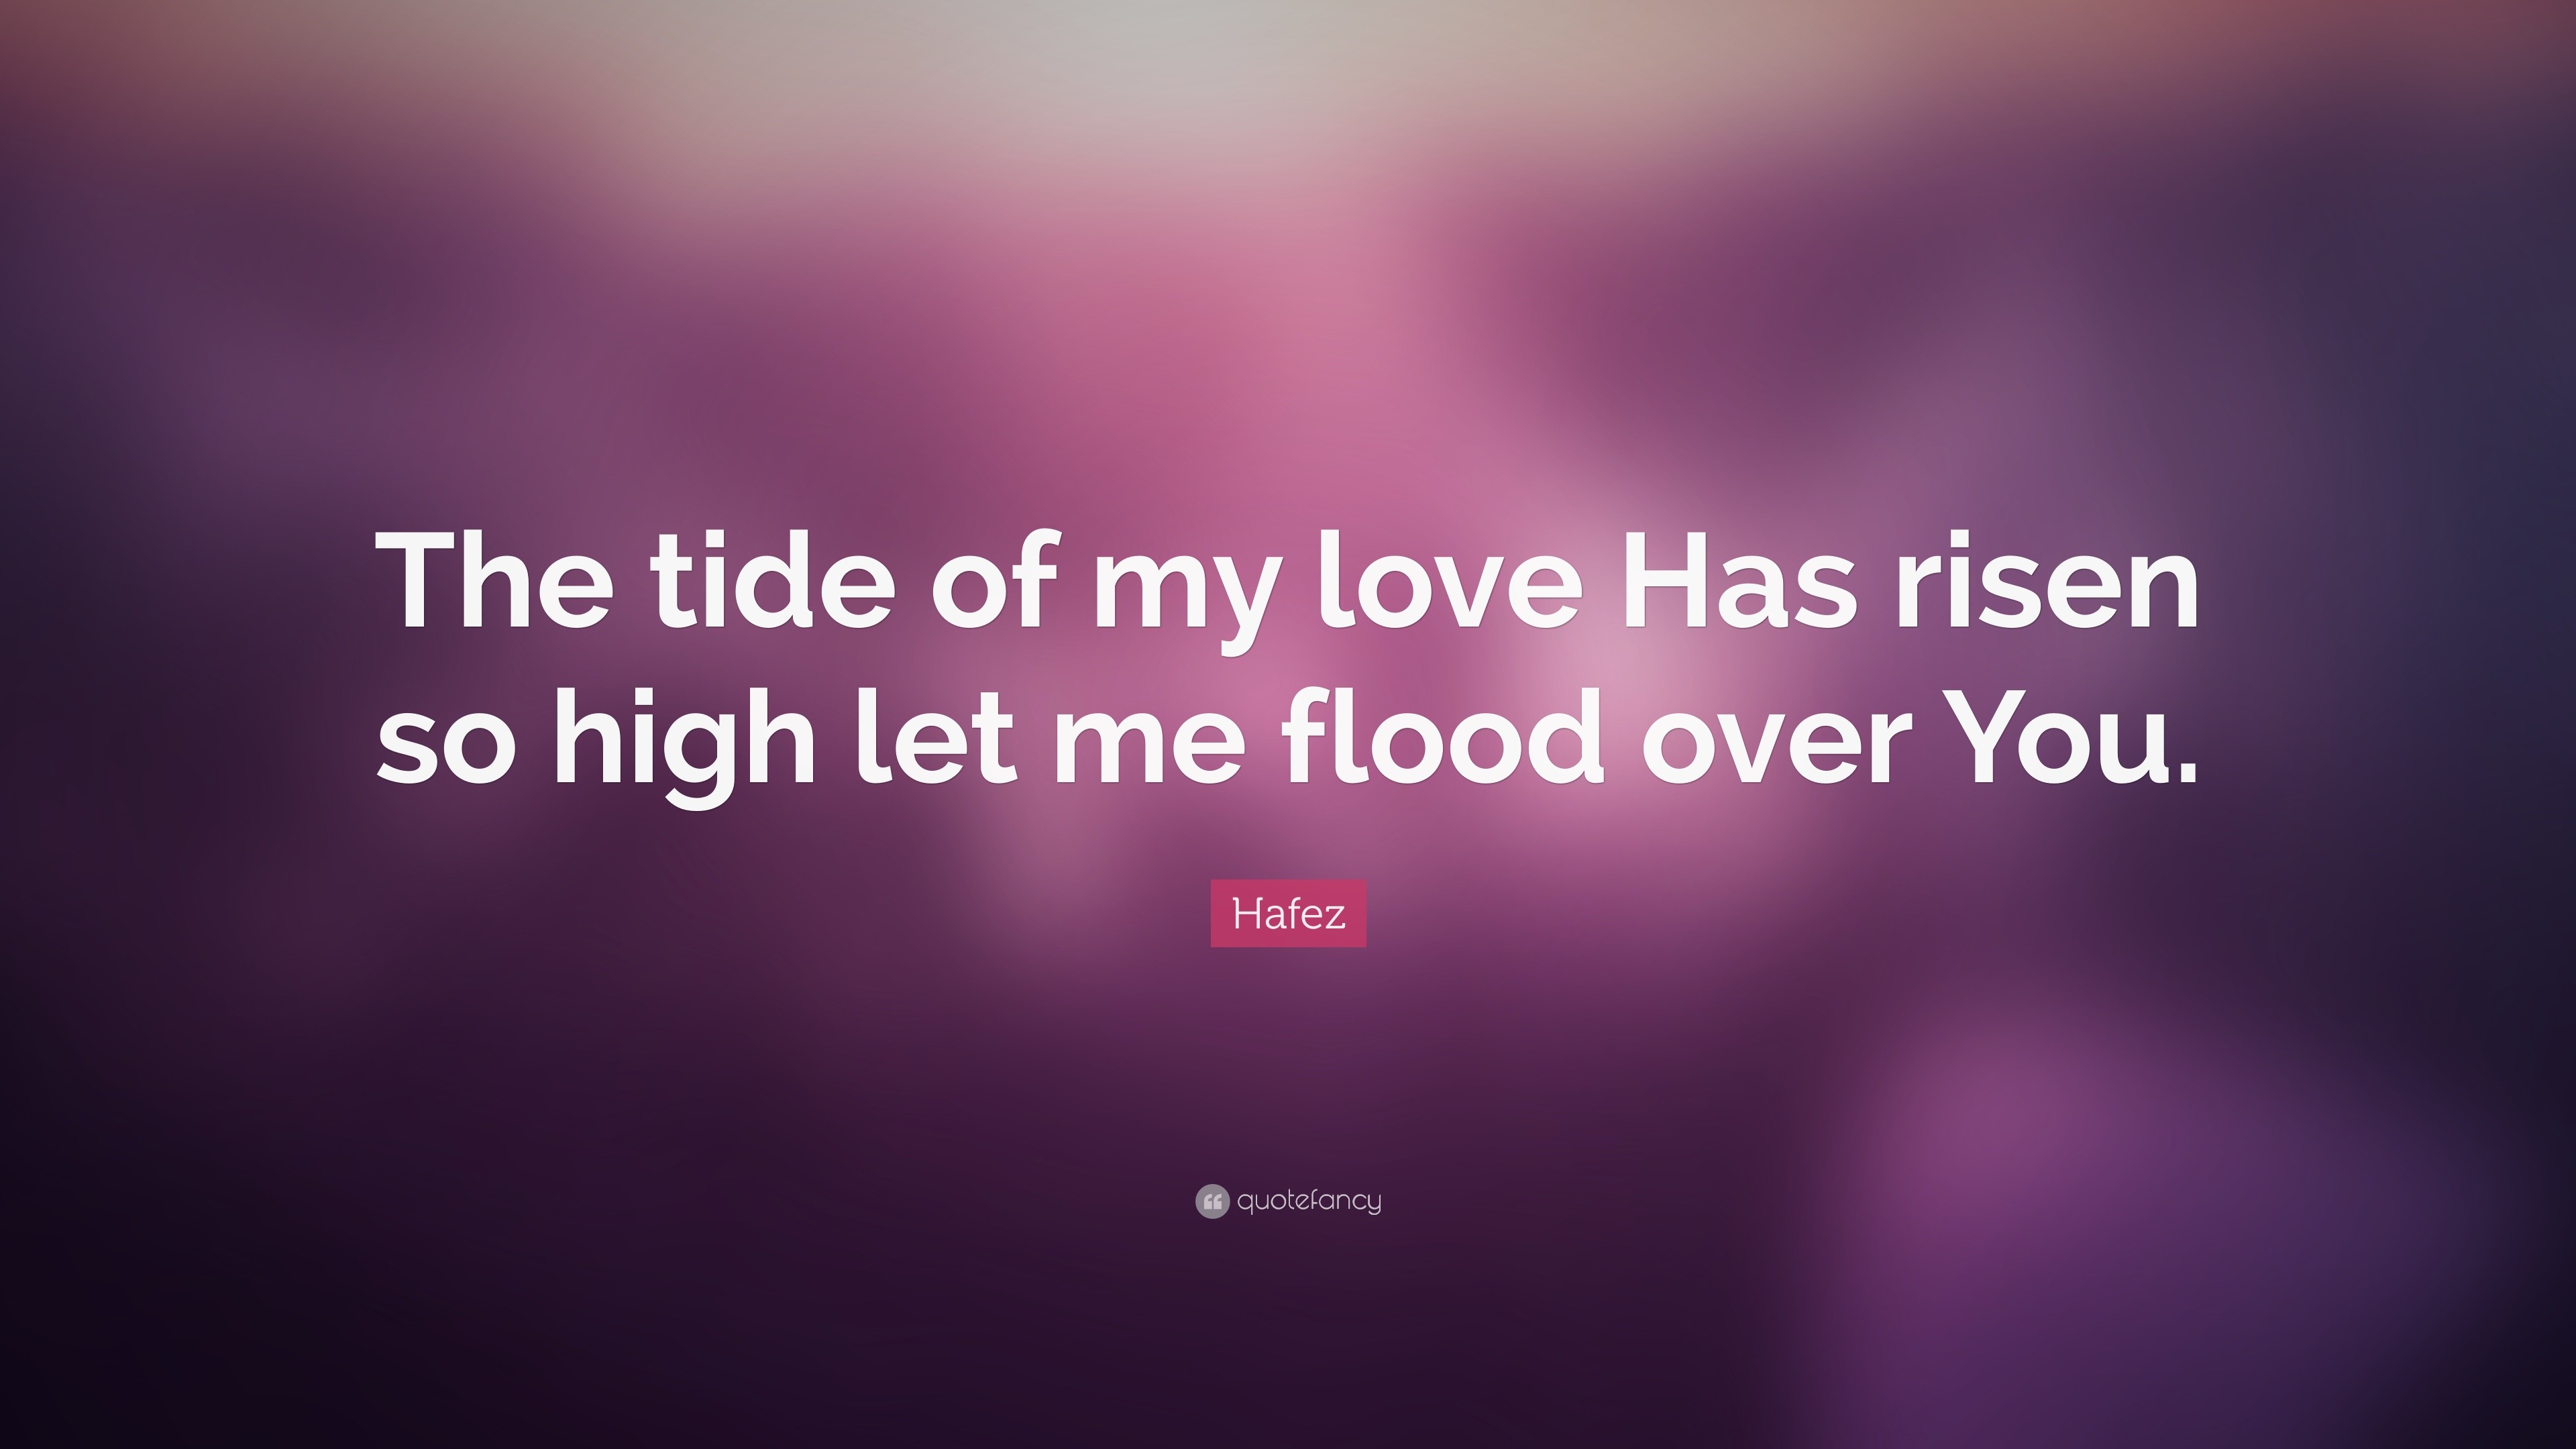 Your Love is High Like the Tide